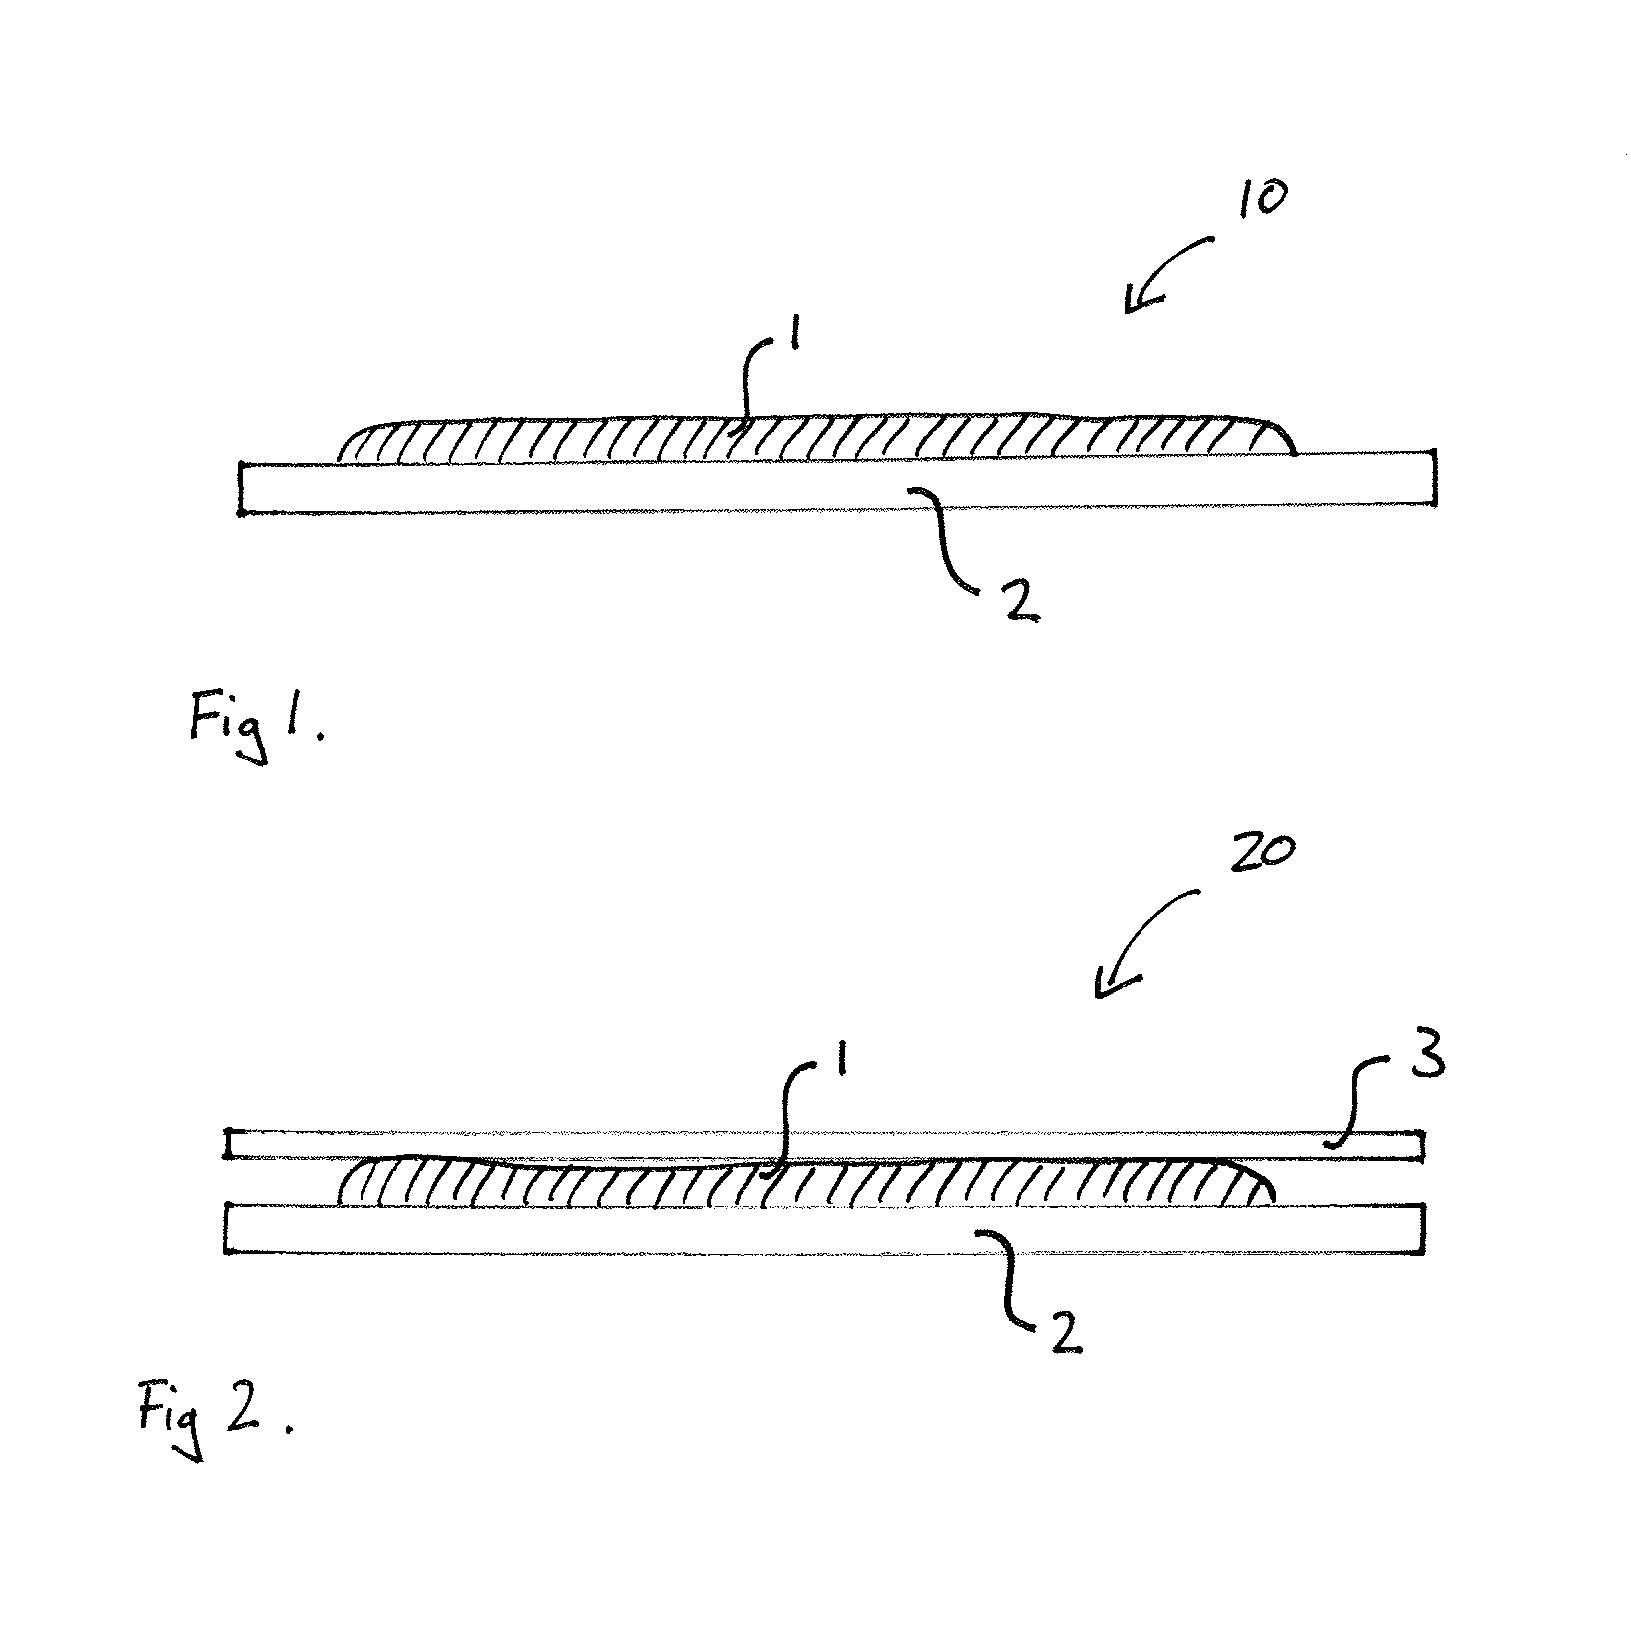 Adhesion promoting compound